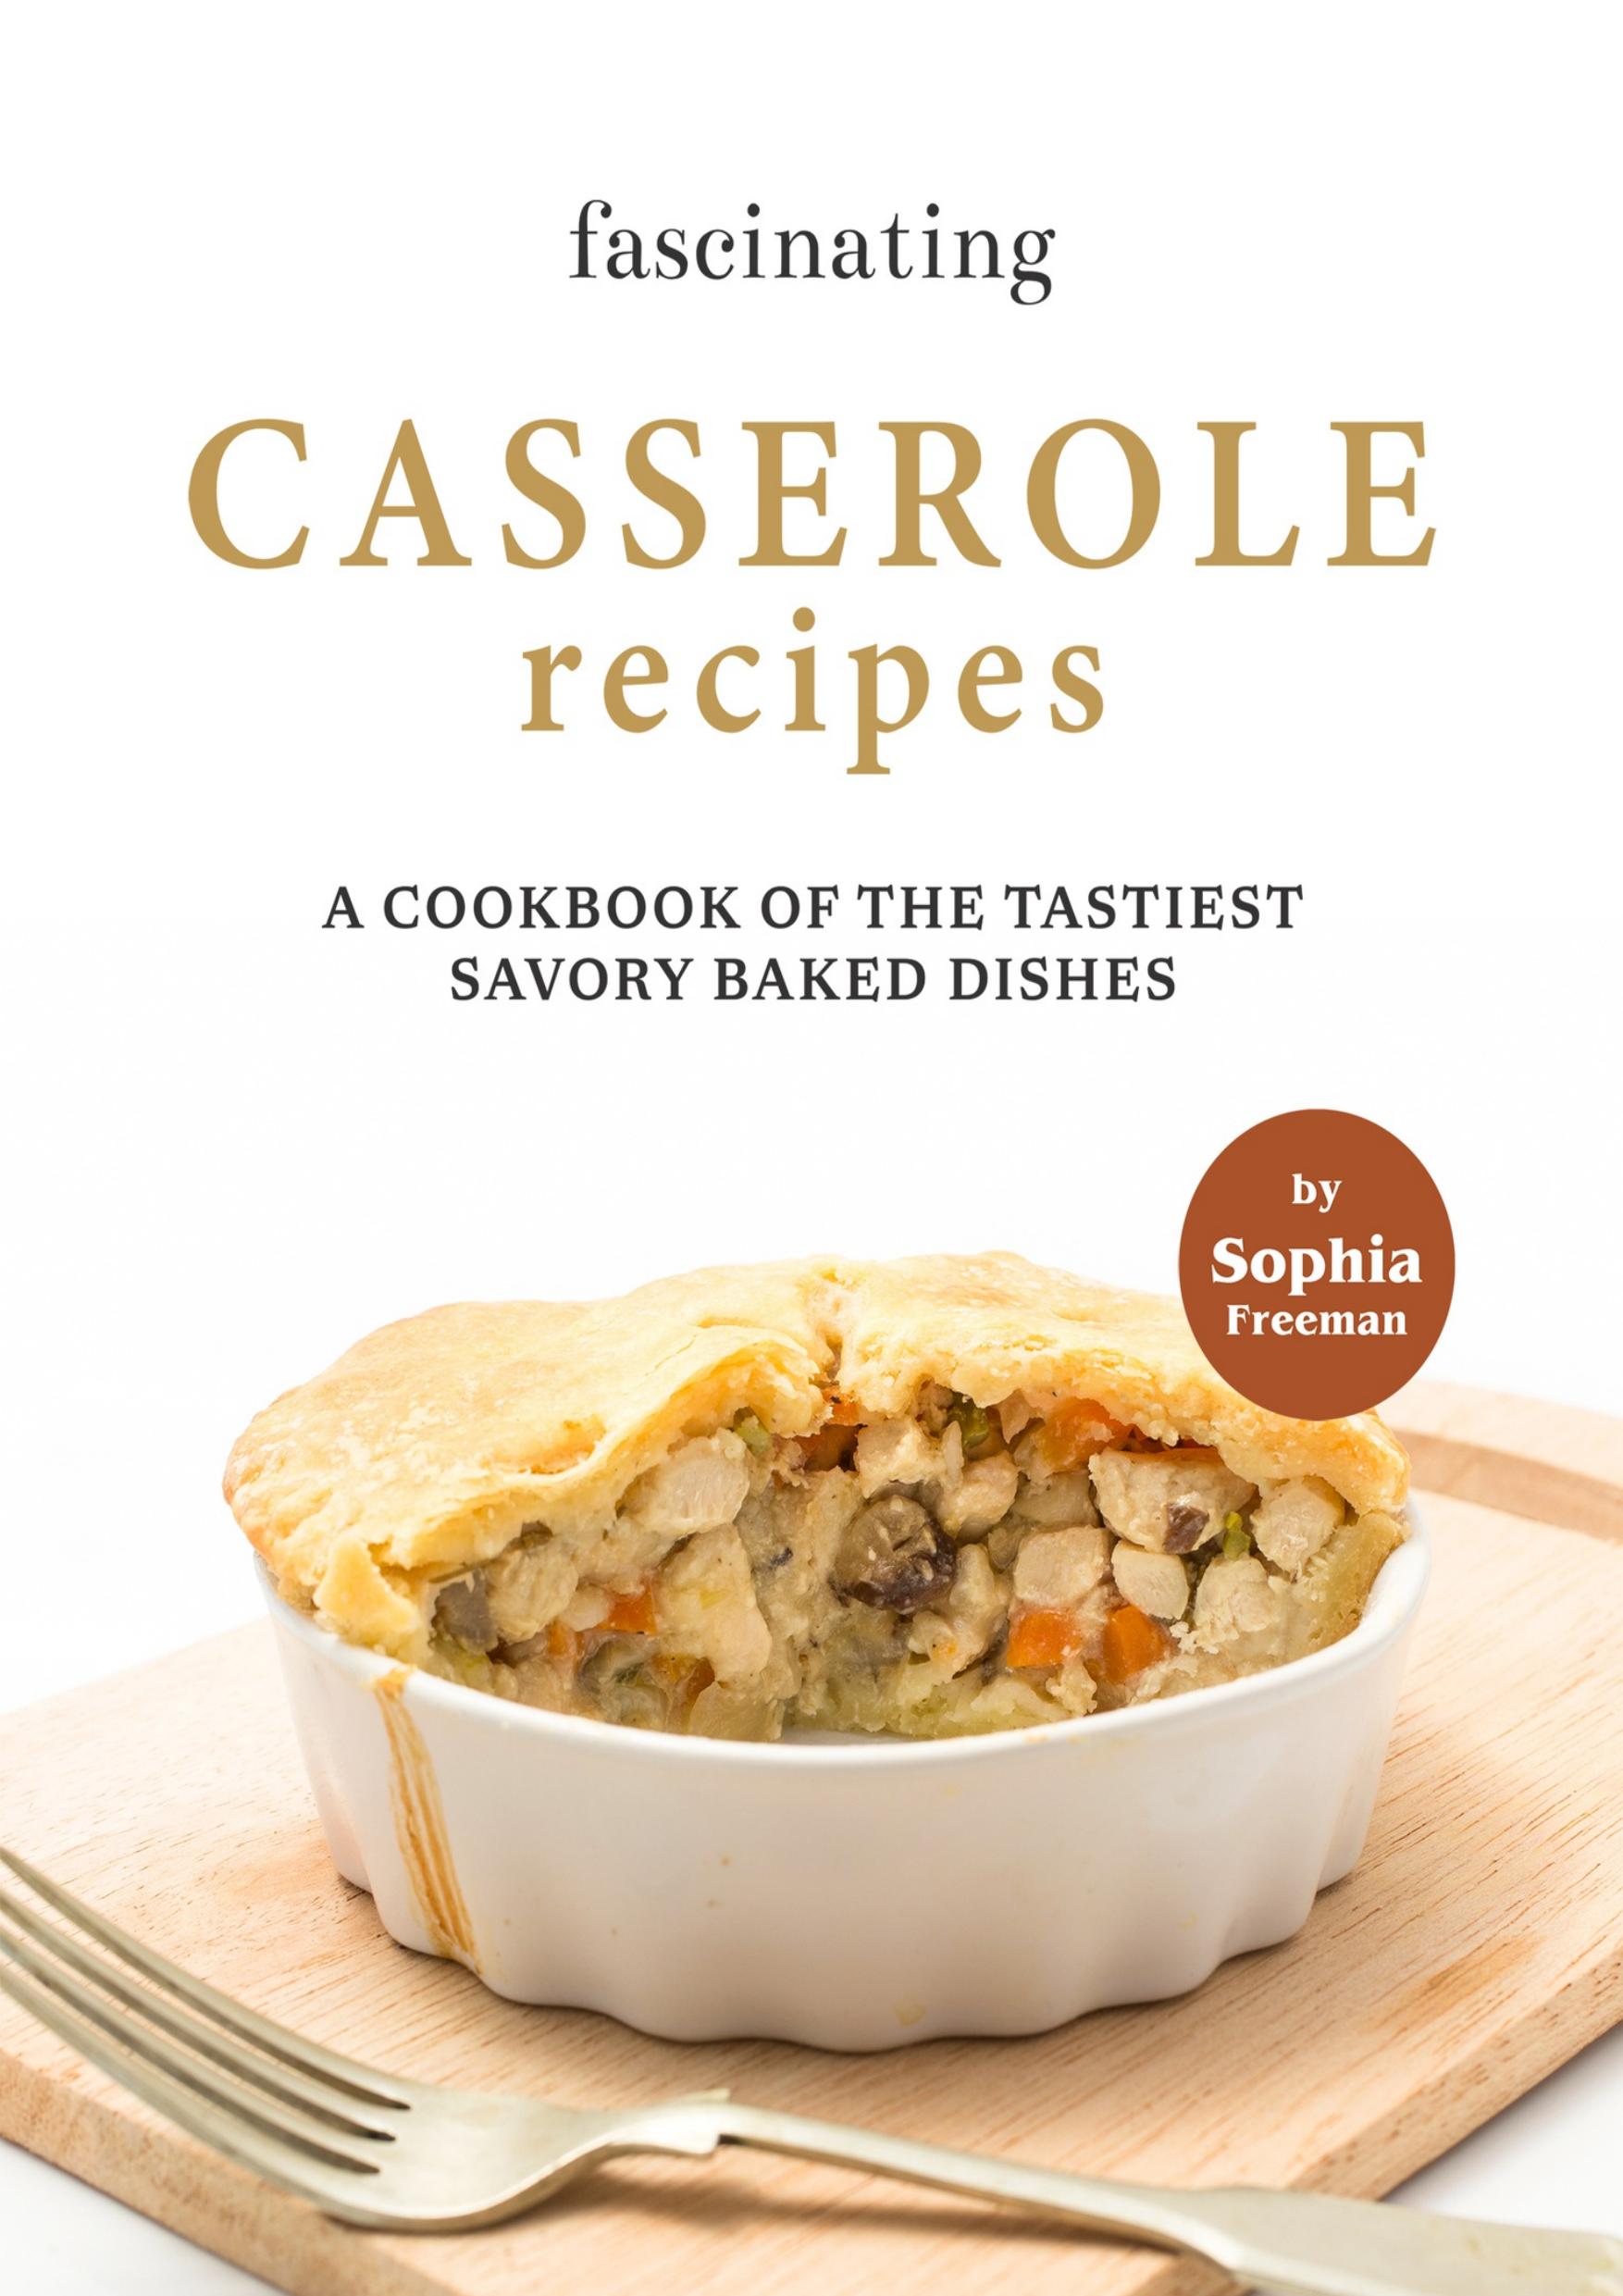 Fascinating Casserole Recipes: A Cookbook of the Tastiest Savory Baked Dishes by Freeman Sophia